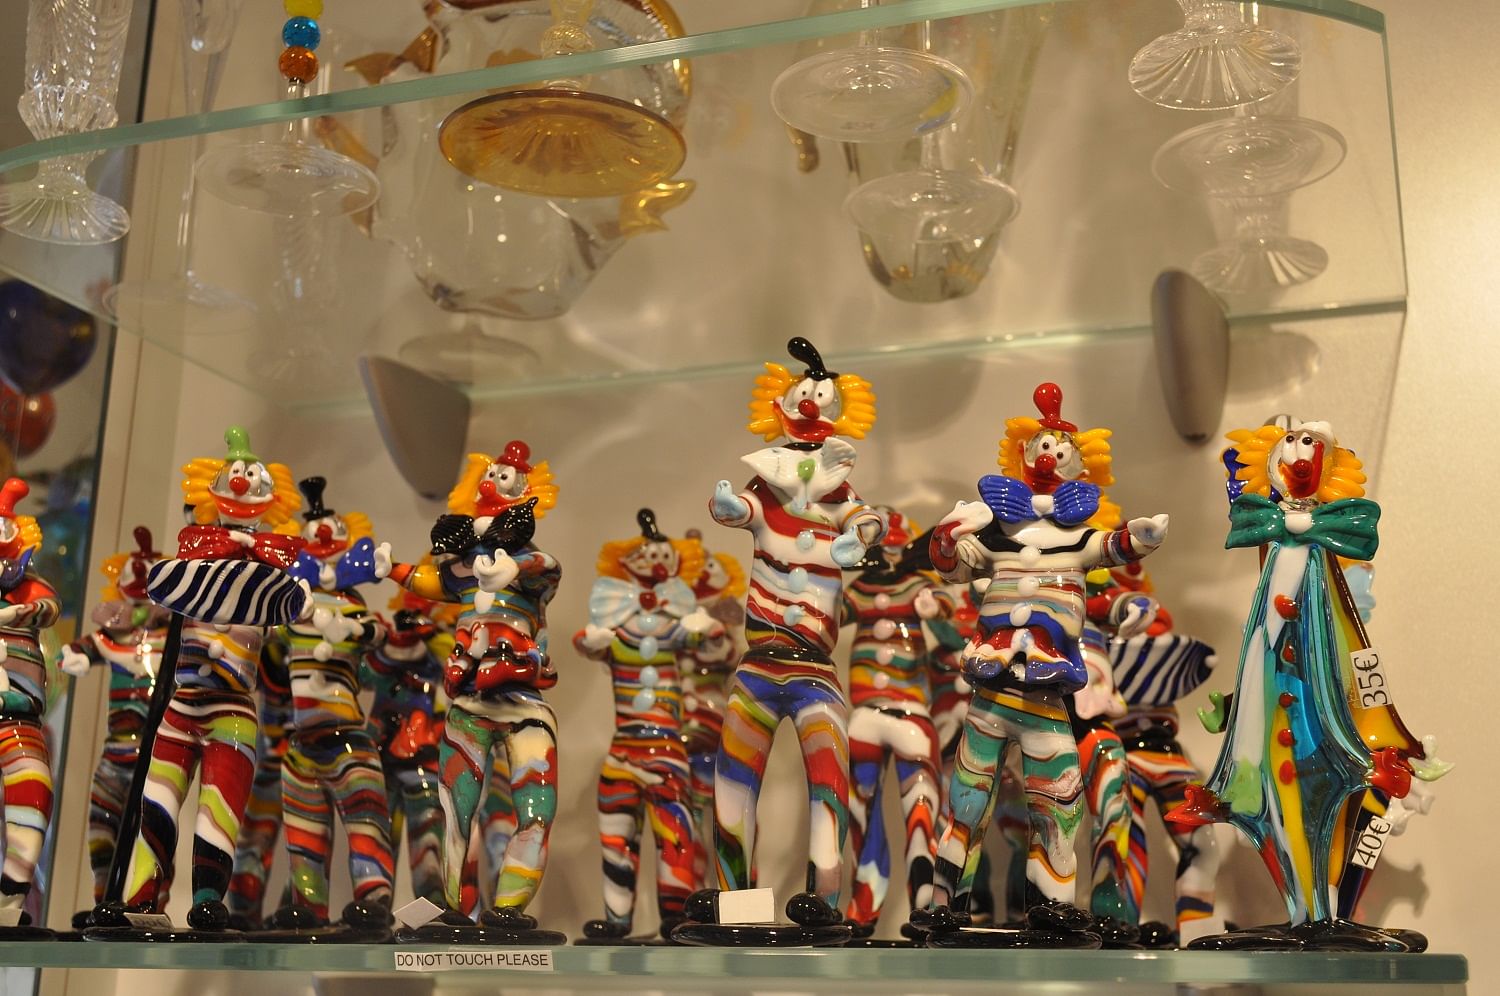 Glass artefacts in Murano. Photo by author